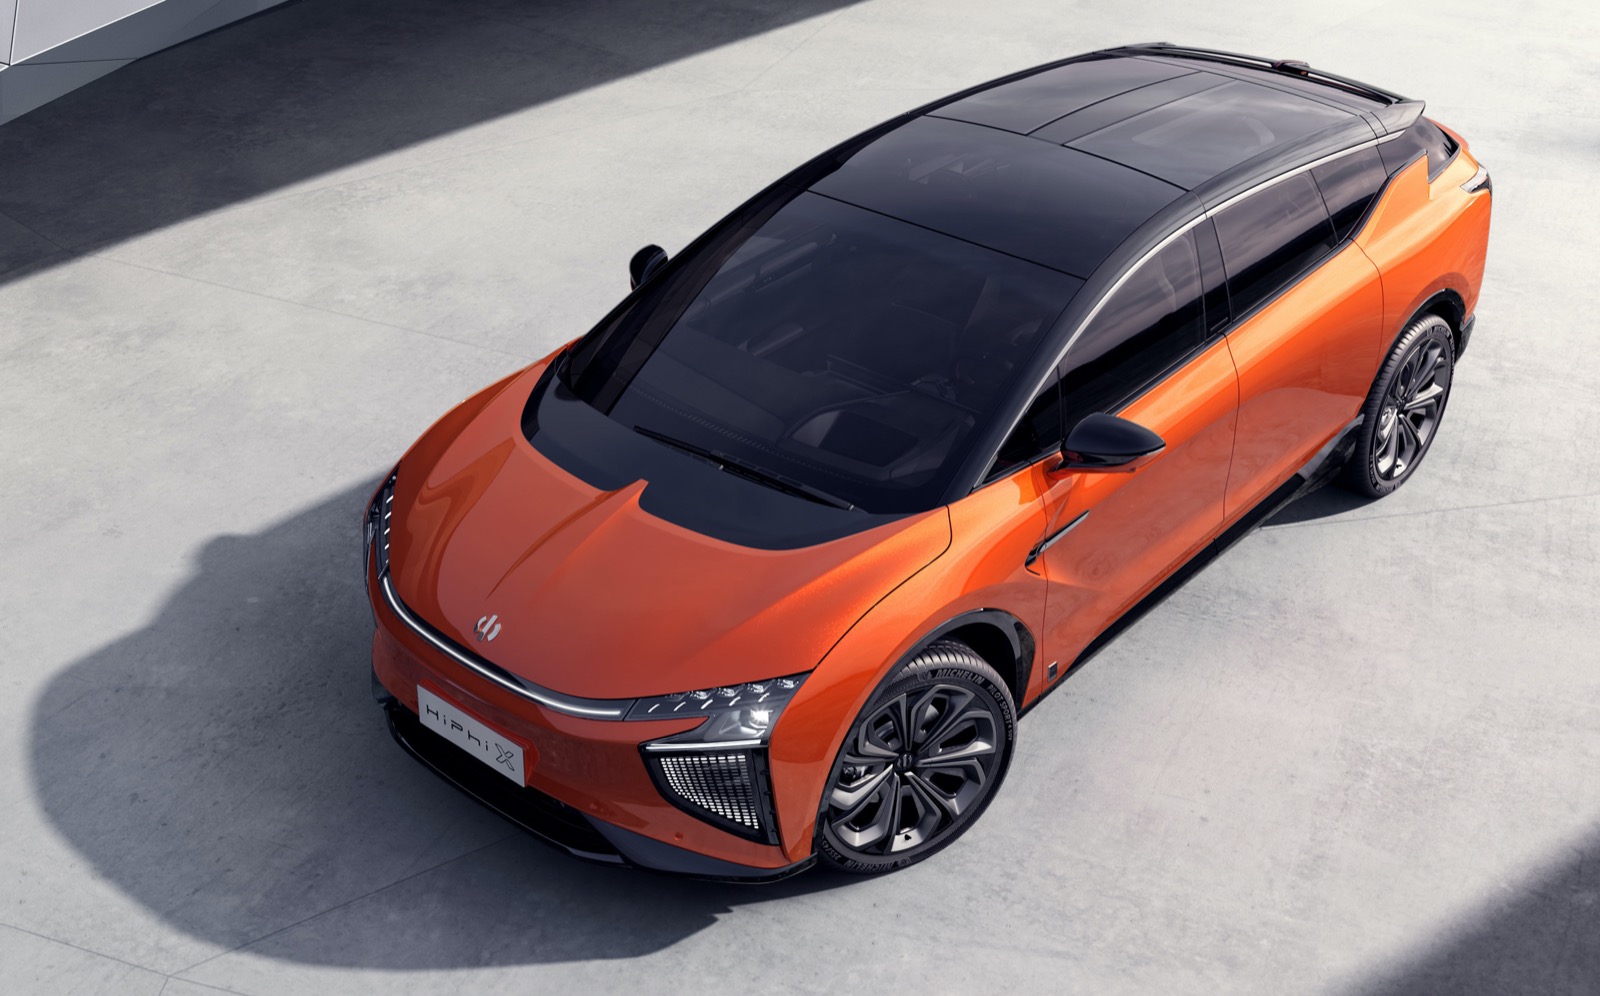 Hiphi X To Be Launched At The 2020 Beijing Auto Show